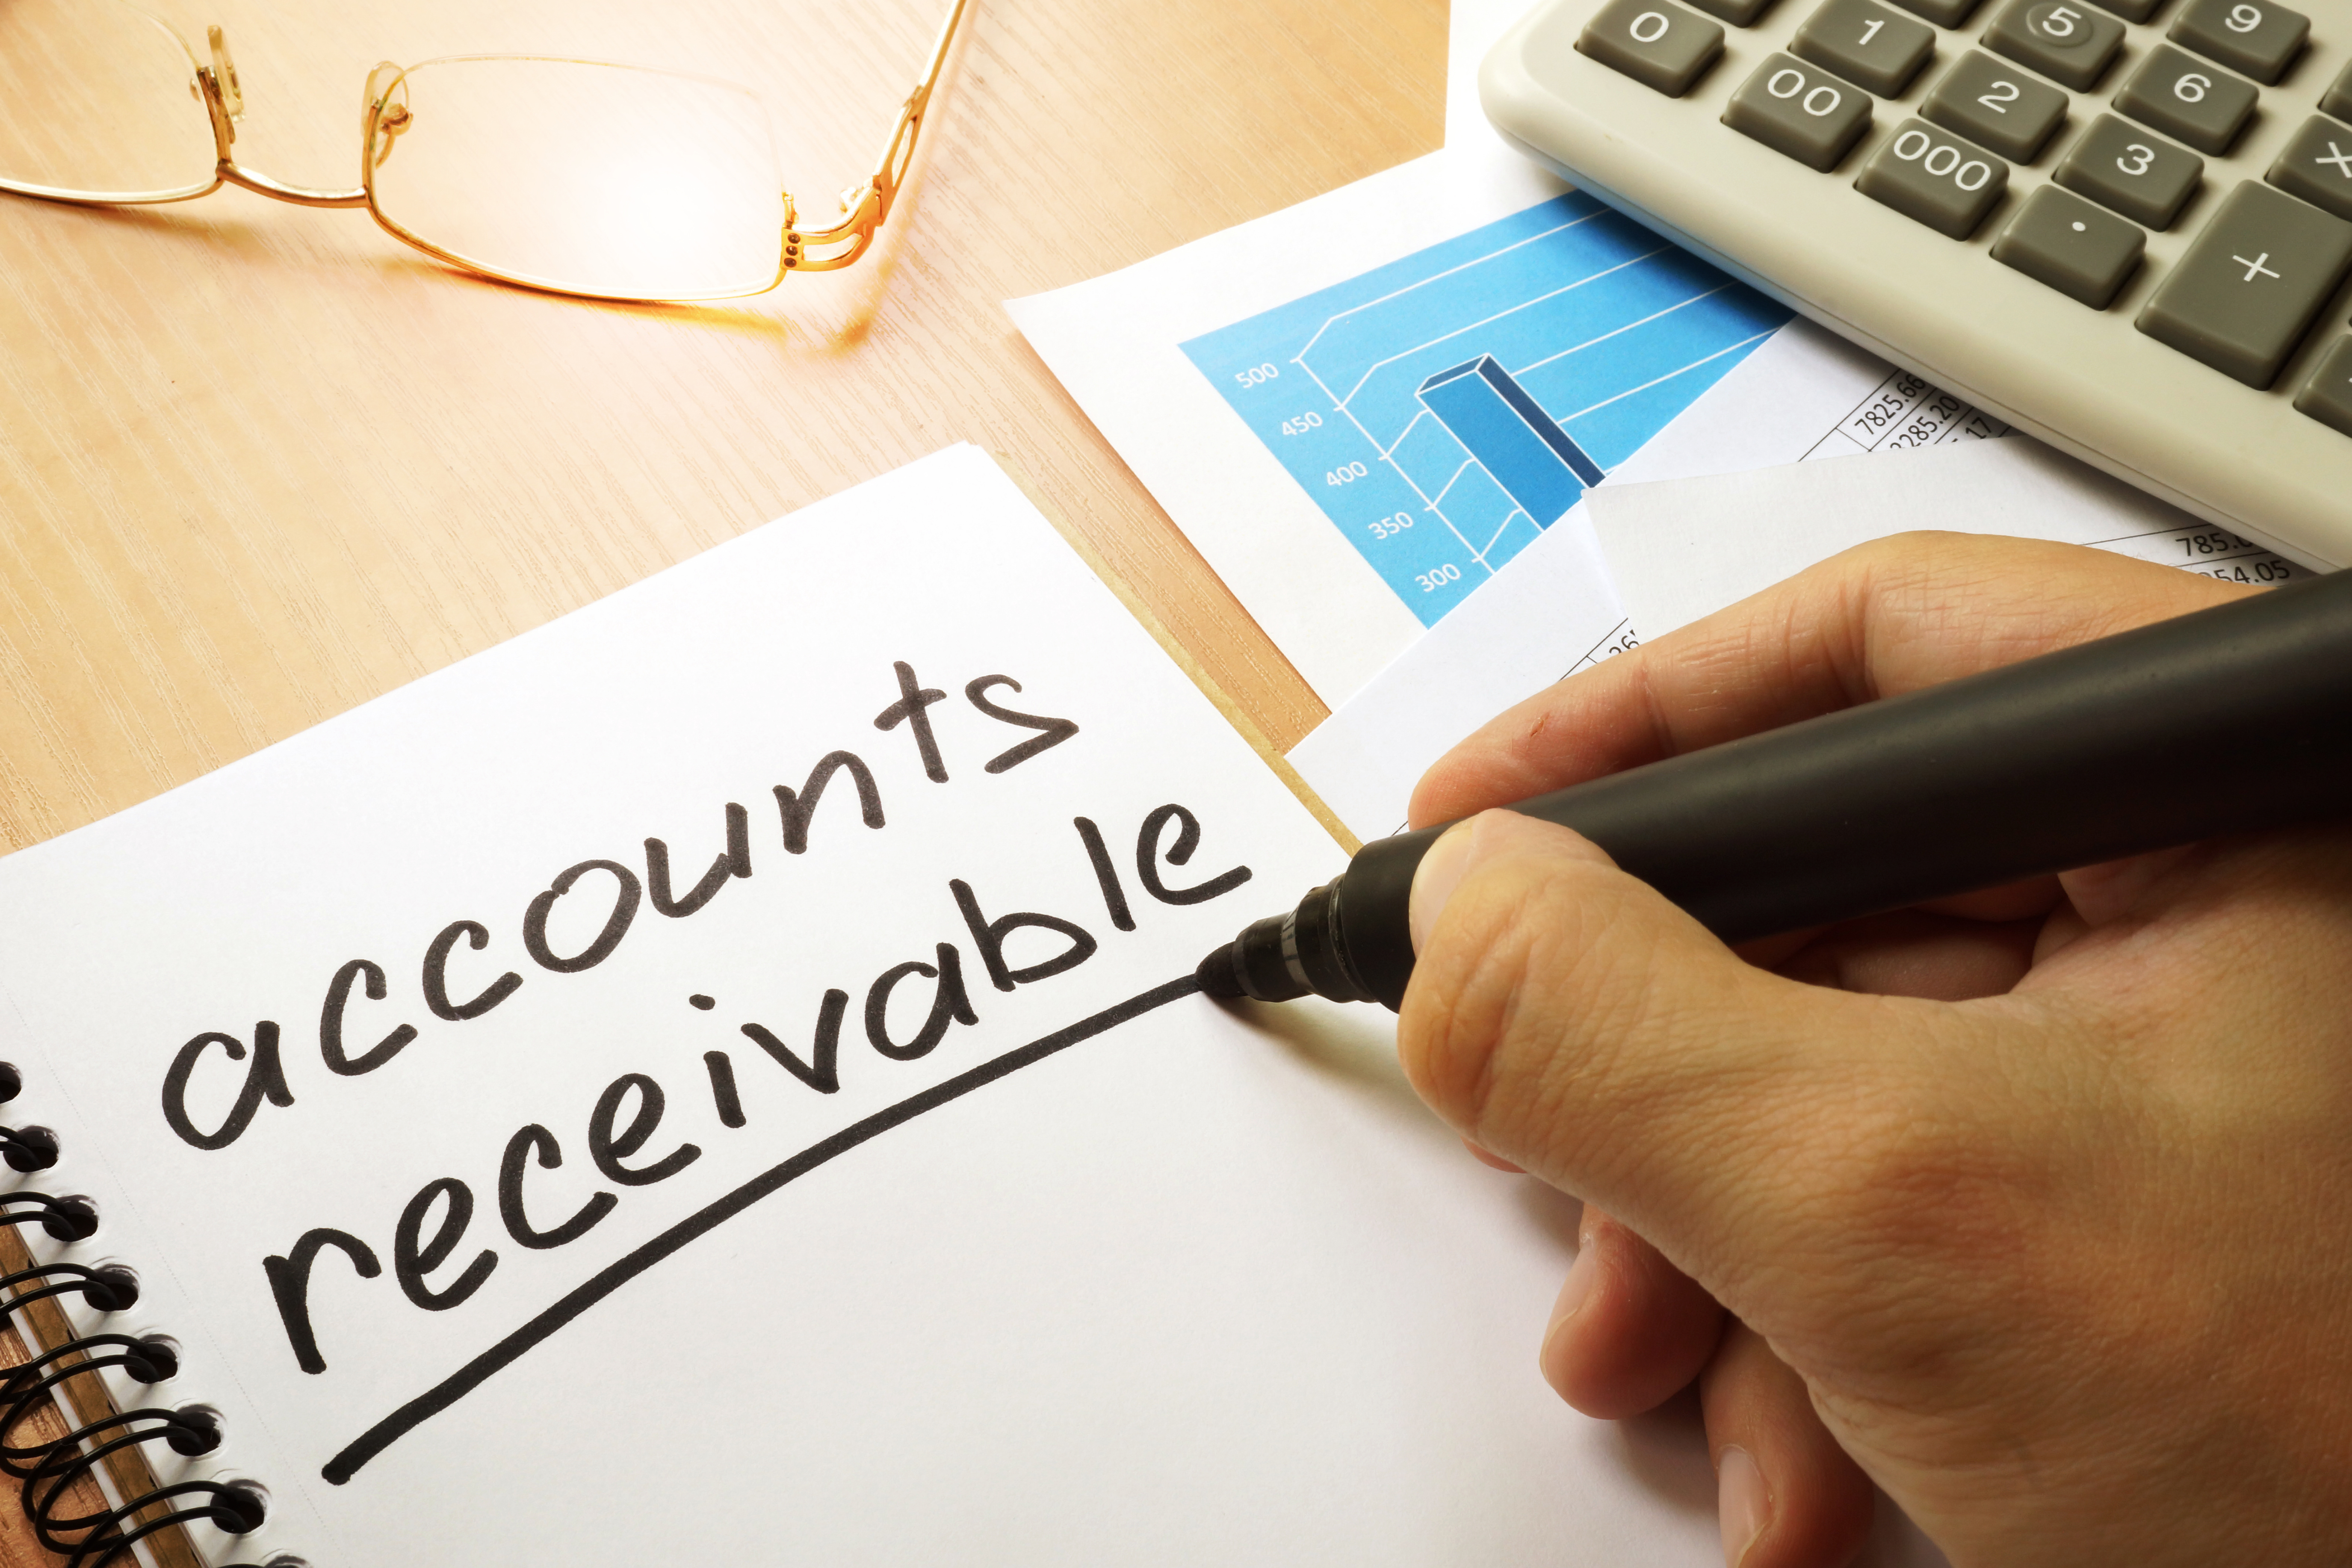 Accounts receivable written by hand in a note.